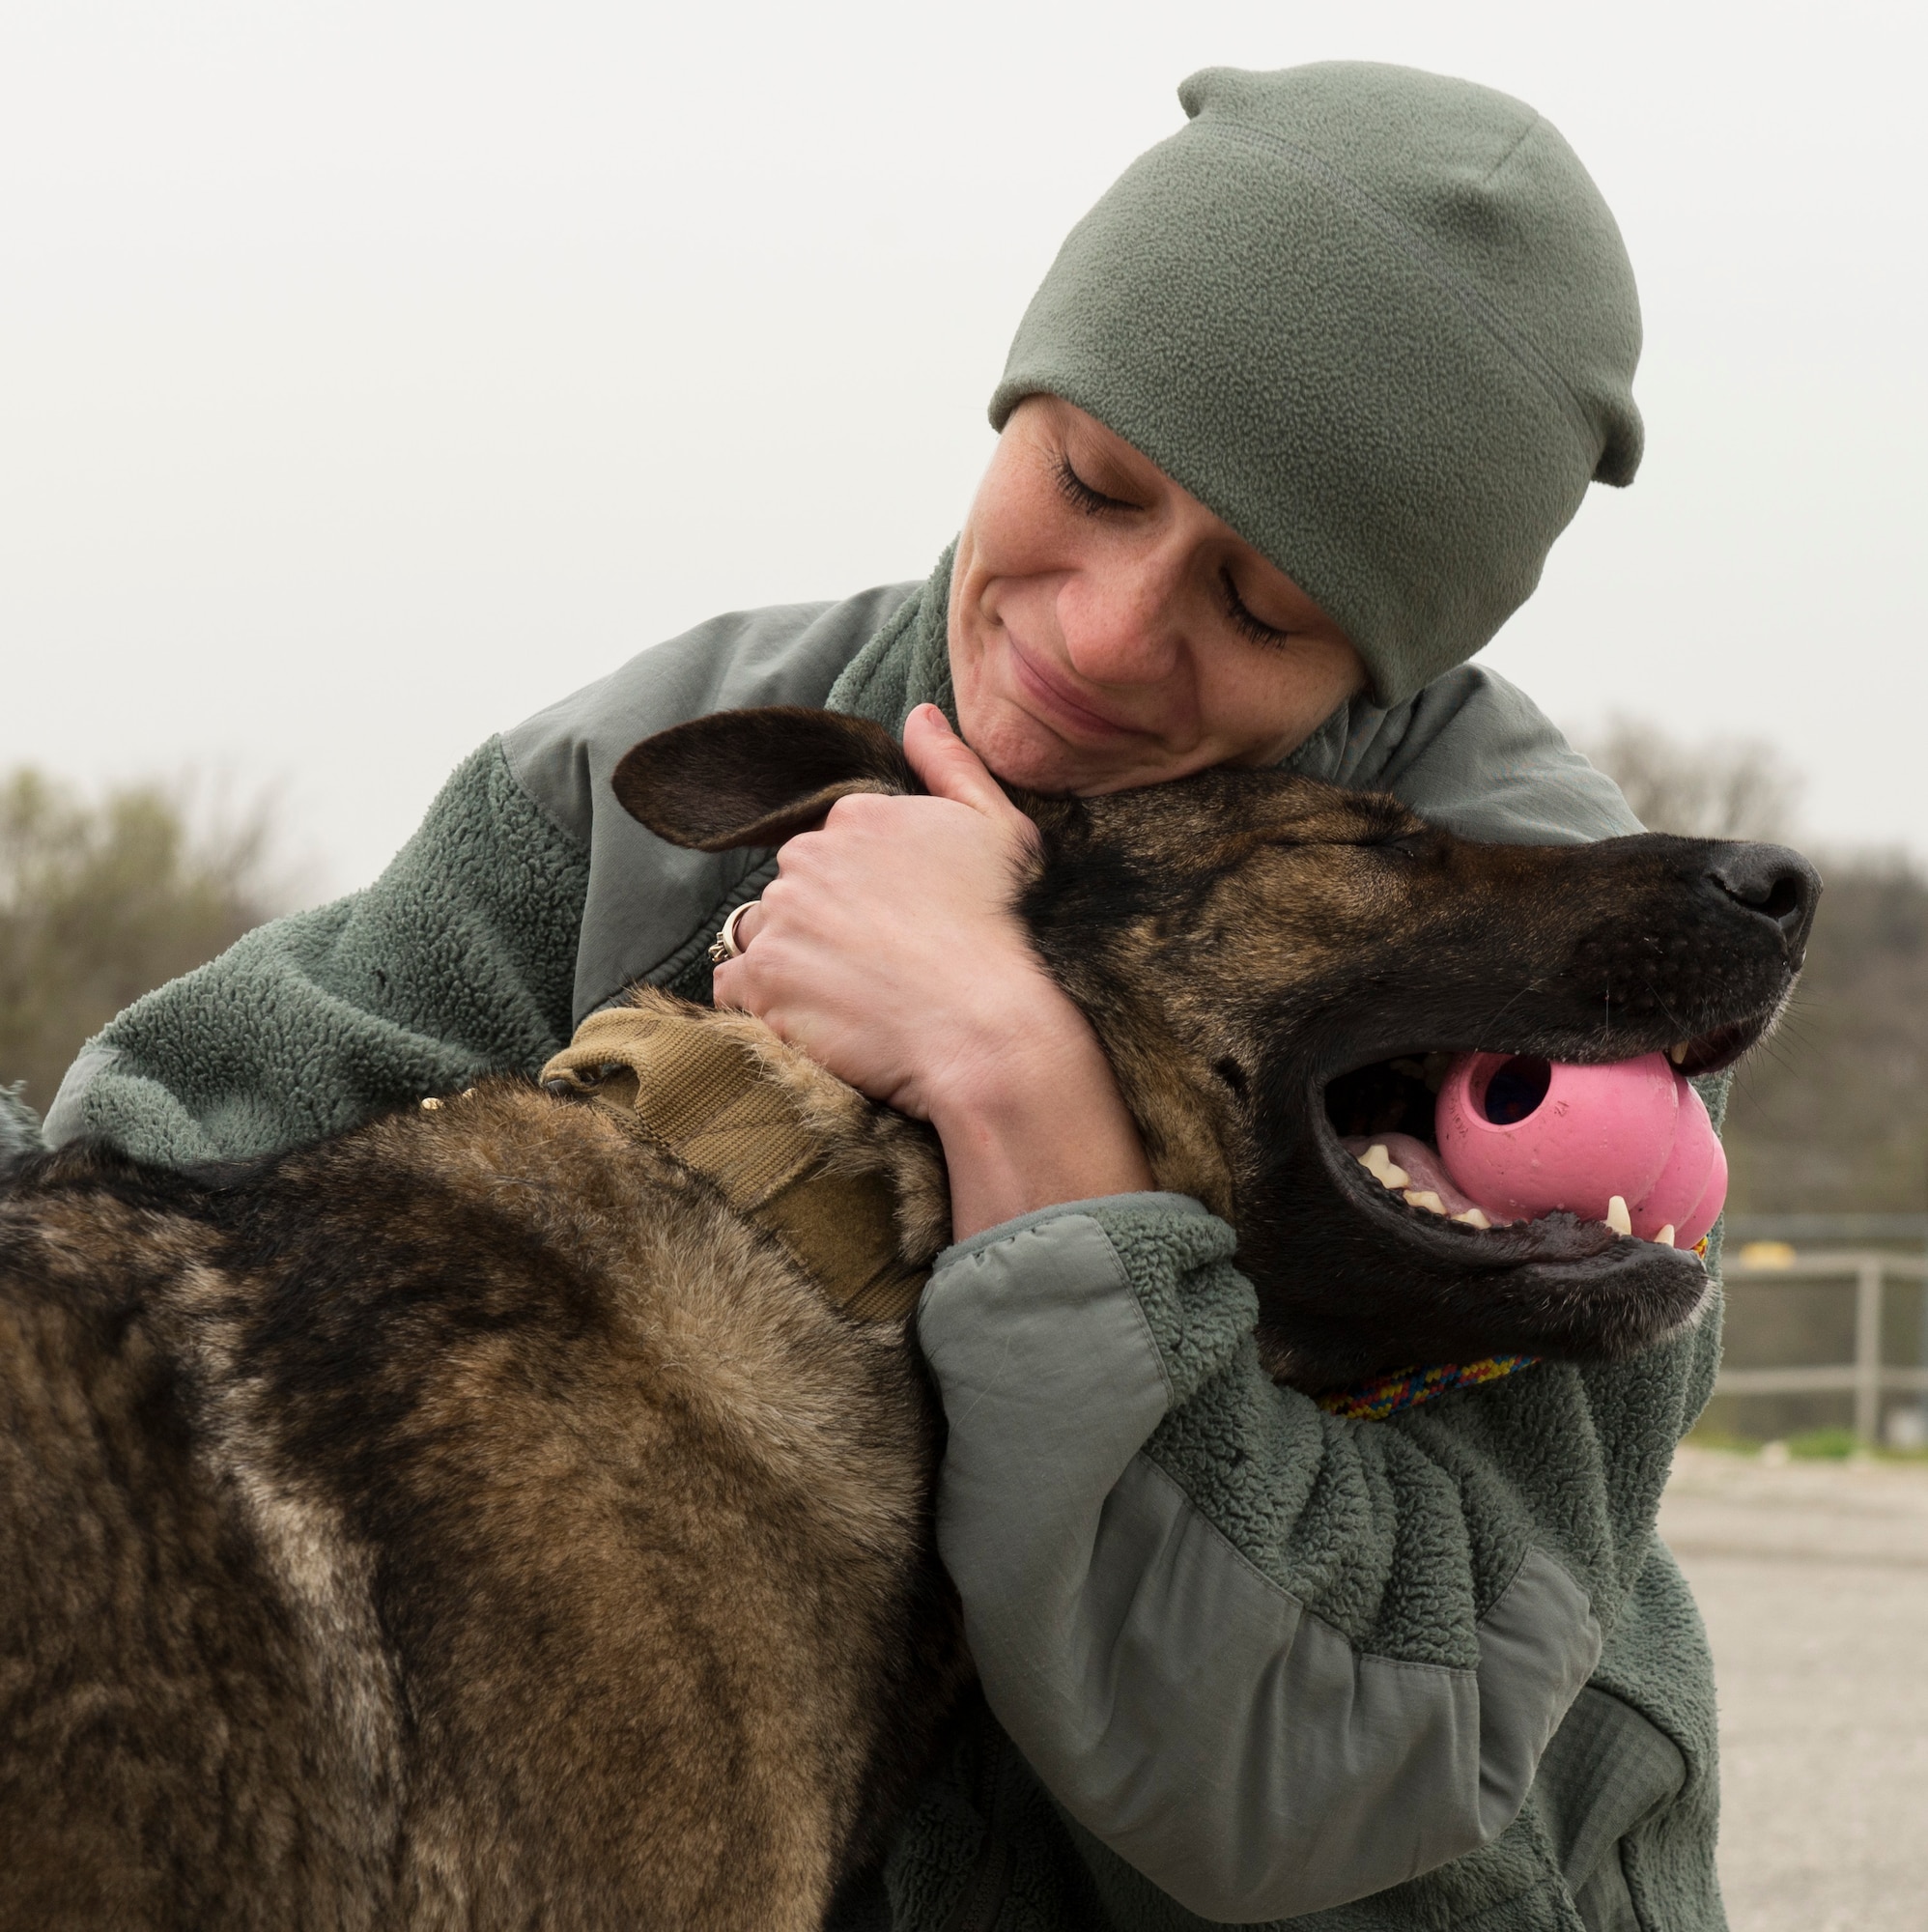 Senior Airman Chelsea LaFever, military working dog handler assigned to the 802nd Security Forces Squadron at Joint Base San Antonio-Lackland, Texas, says her final farewell to MWD Daysi, Feb. 27, 2015. (U.S. Air Force photo by Airman 1st Class Justine Rho)